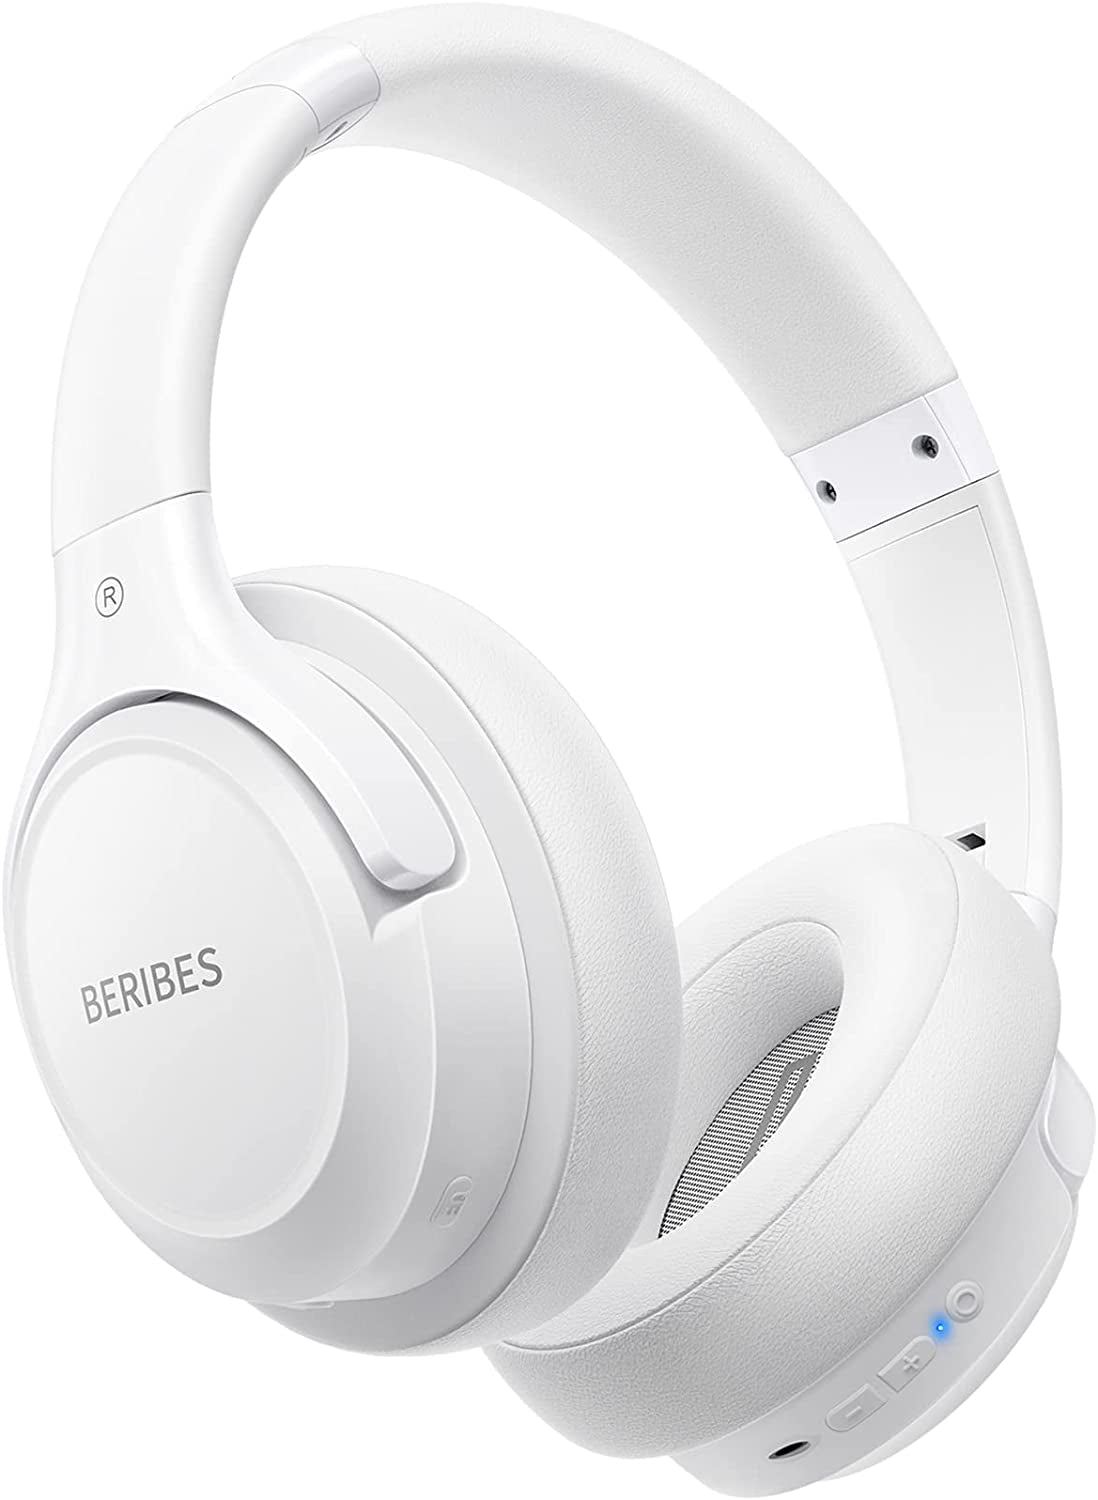 Bluetooth Headphones Over Ear, 65H Playtime and 3 EQ Music Modes Wireless Headphones with Microphone